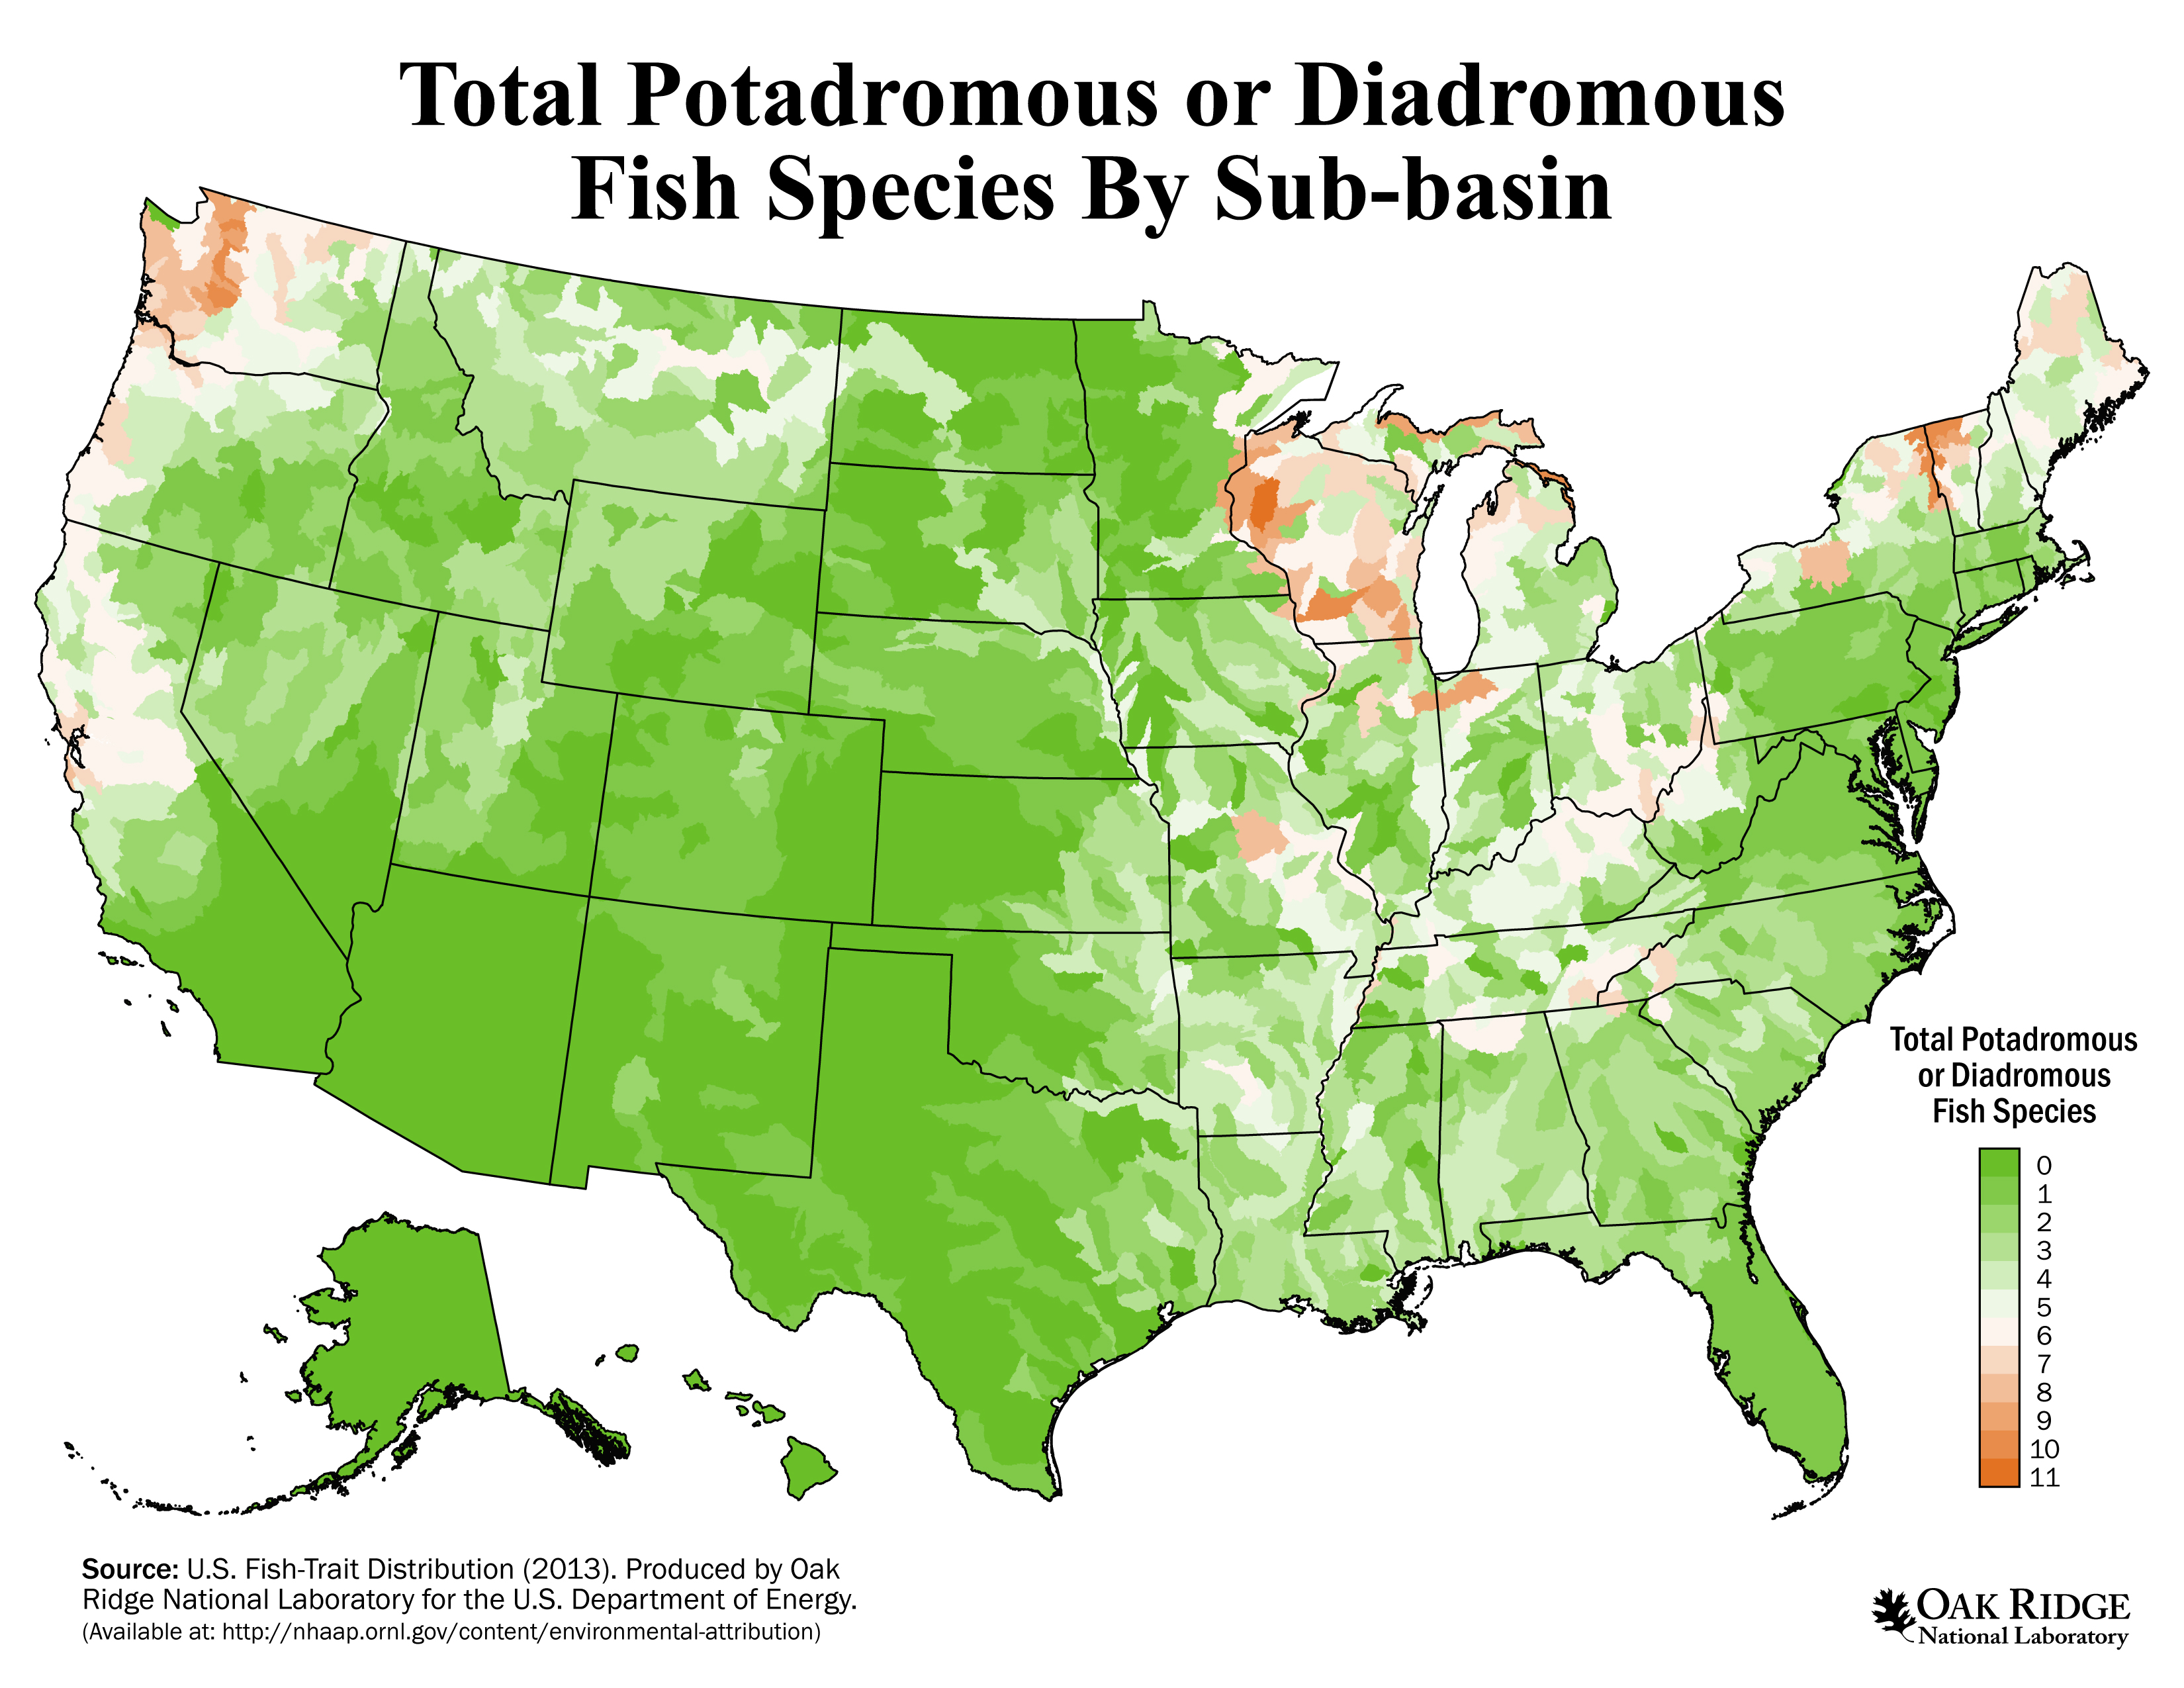 Total Potadromous or Diadromous Fish Species by Sub-basin in the